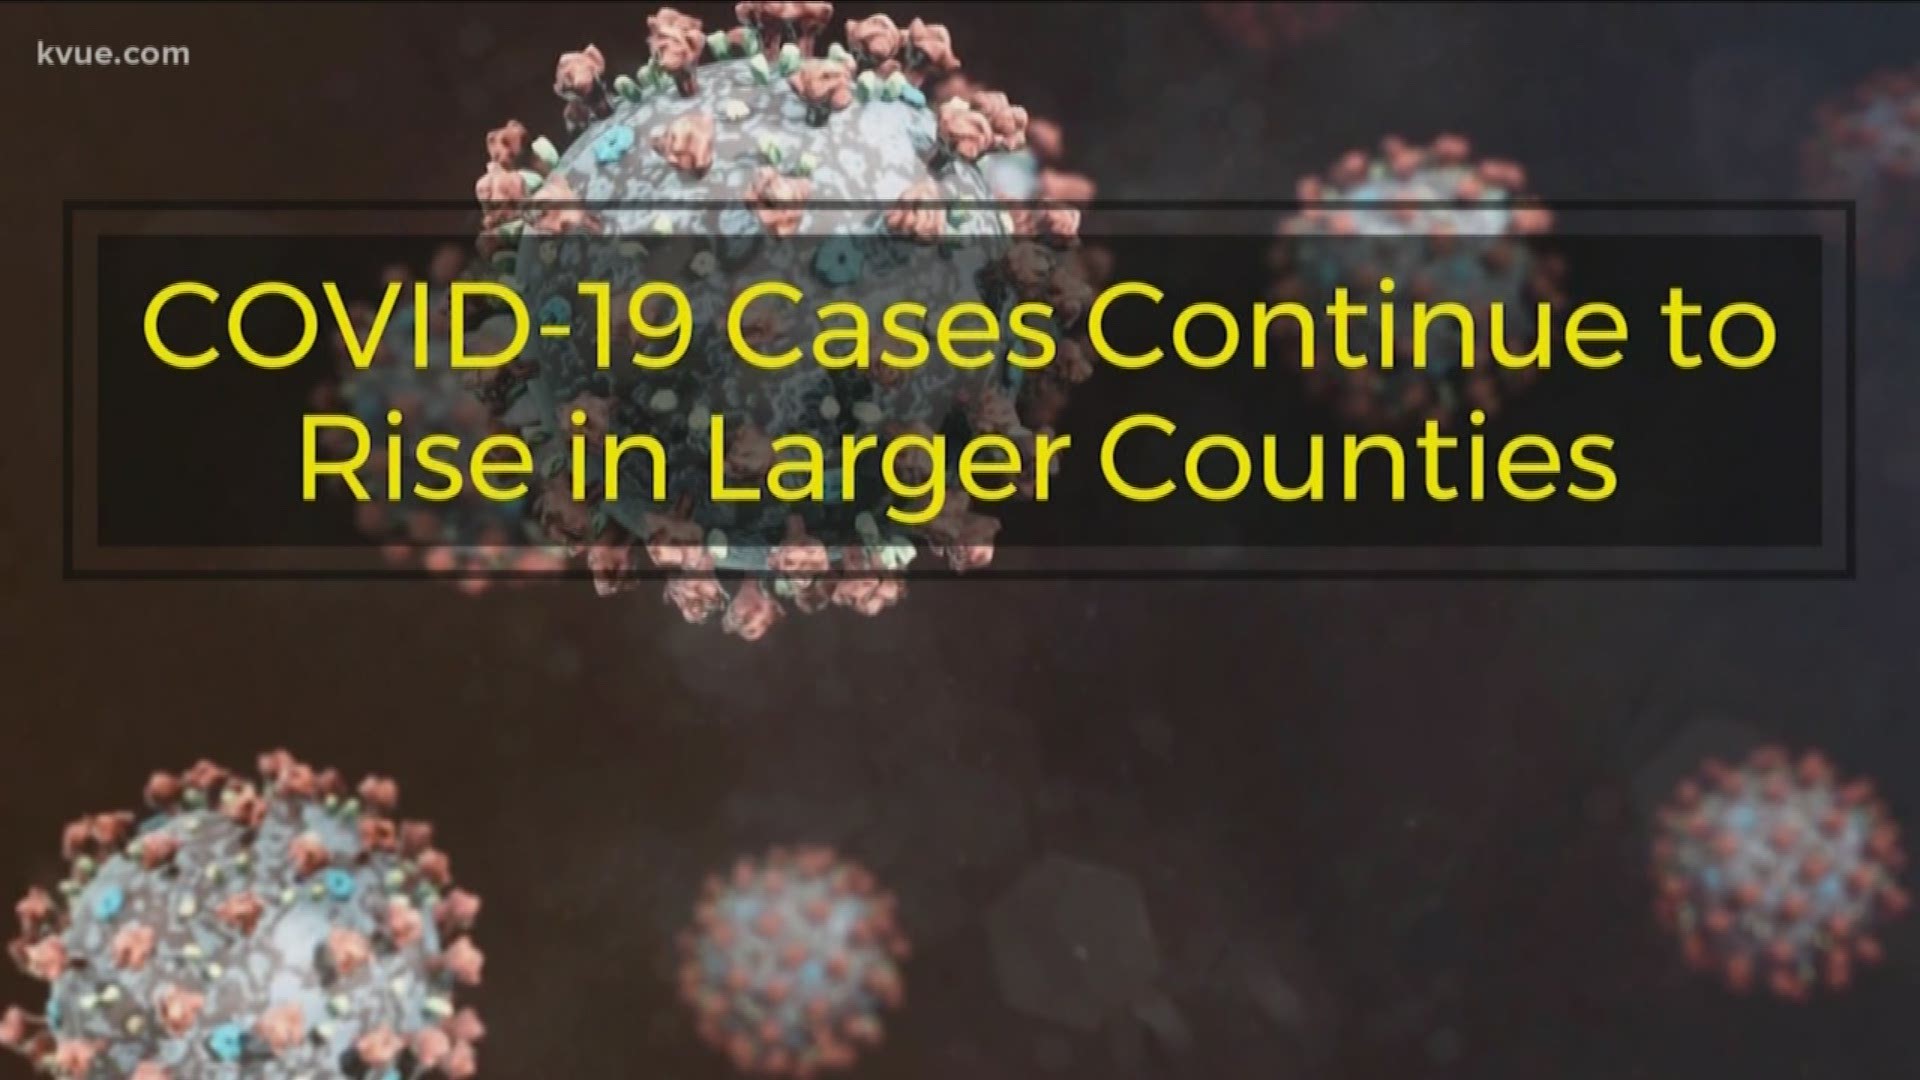 Confirmed cases of COVID-19 continue to rise in the larger Central Texas counties, while cases in smaller counties generally remain unchanged.